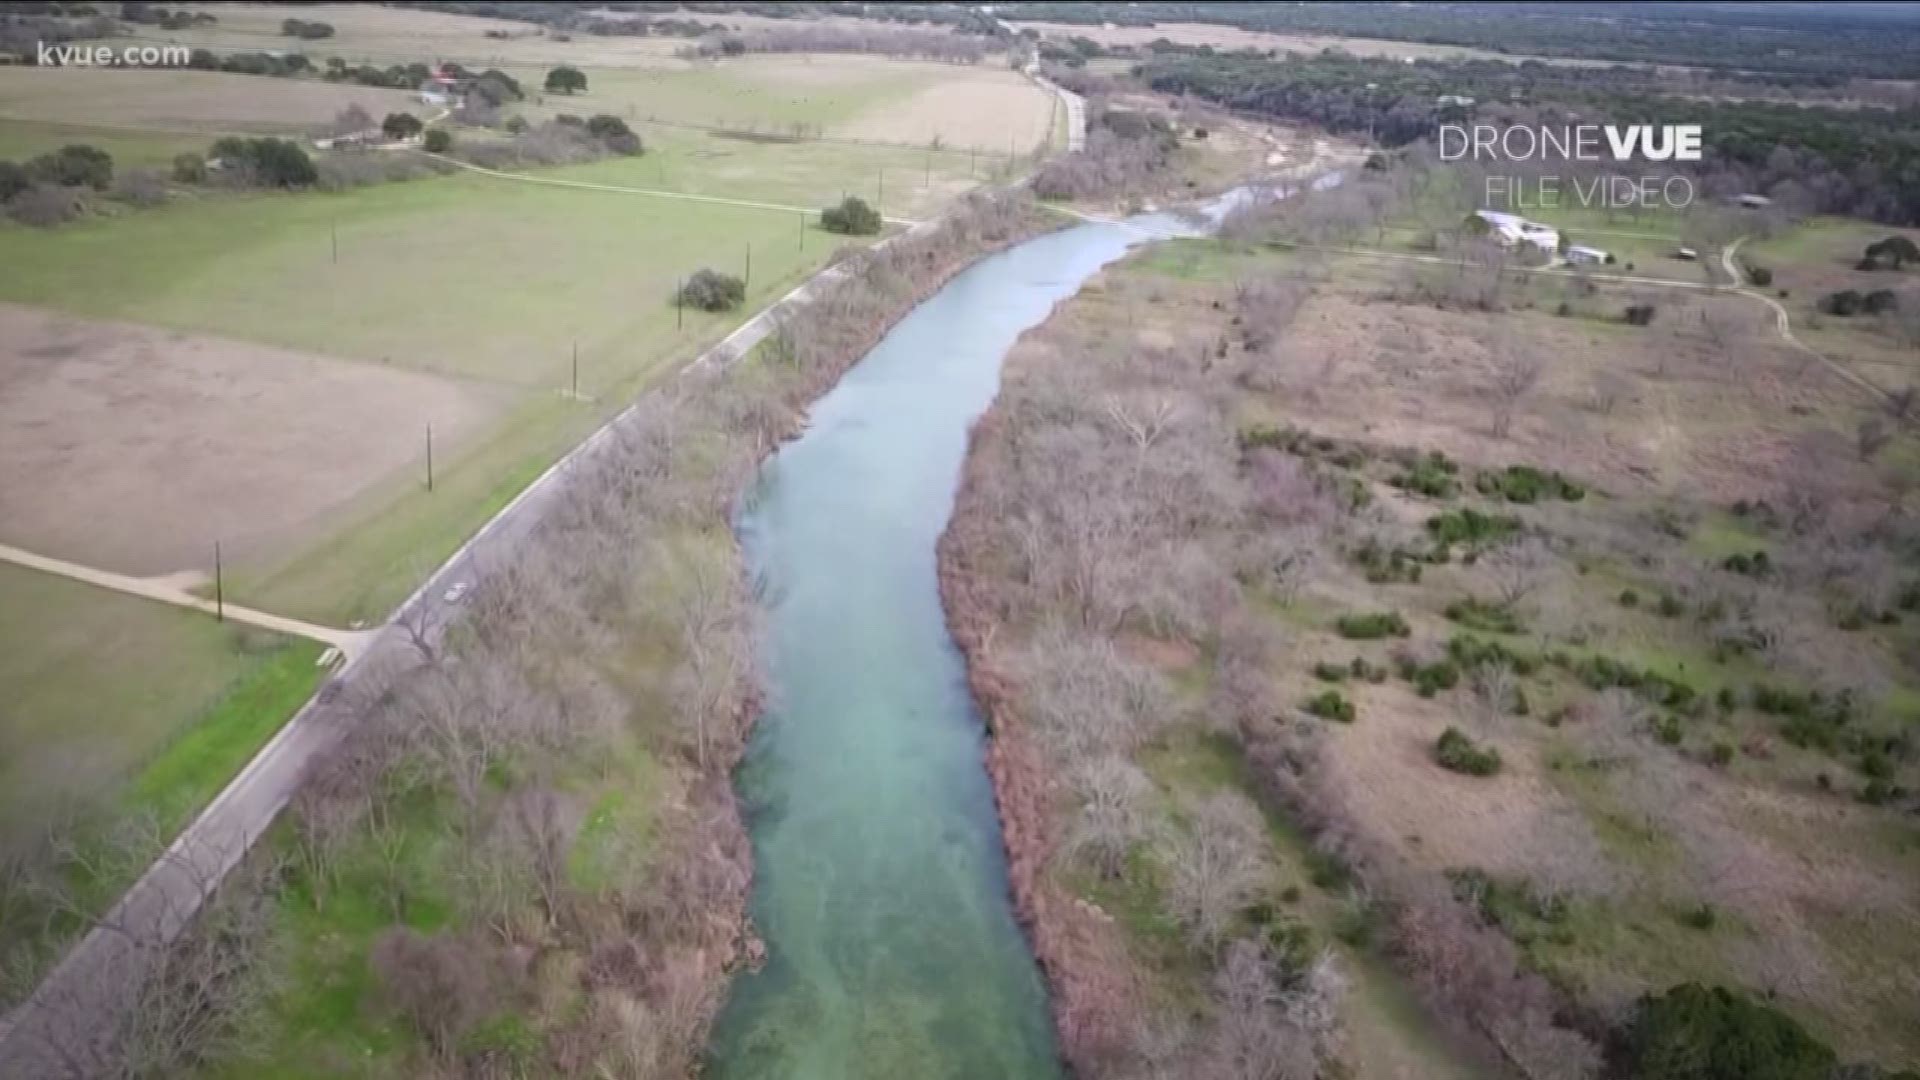 The Texas Commission on Environmental Quality (TCEQ) fined Stermaster Properties $12,650 after enforcement records showed the plant didn't get approval for the Edwards Aquifer Protection Plan.